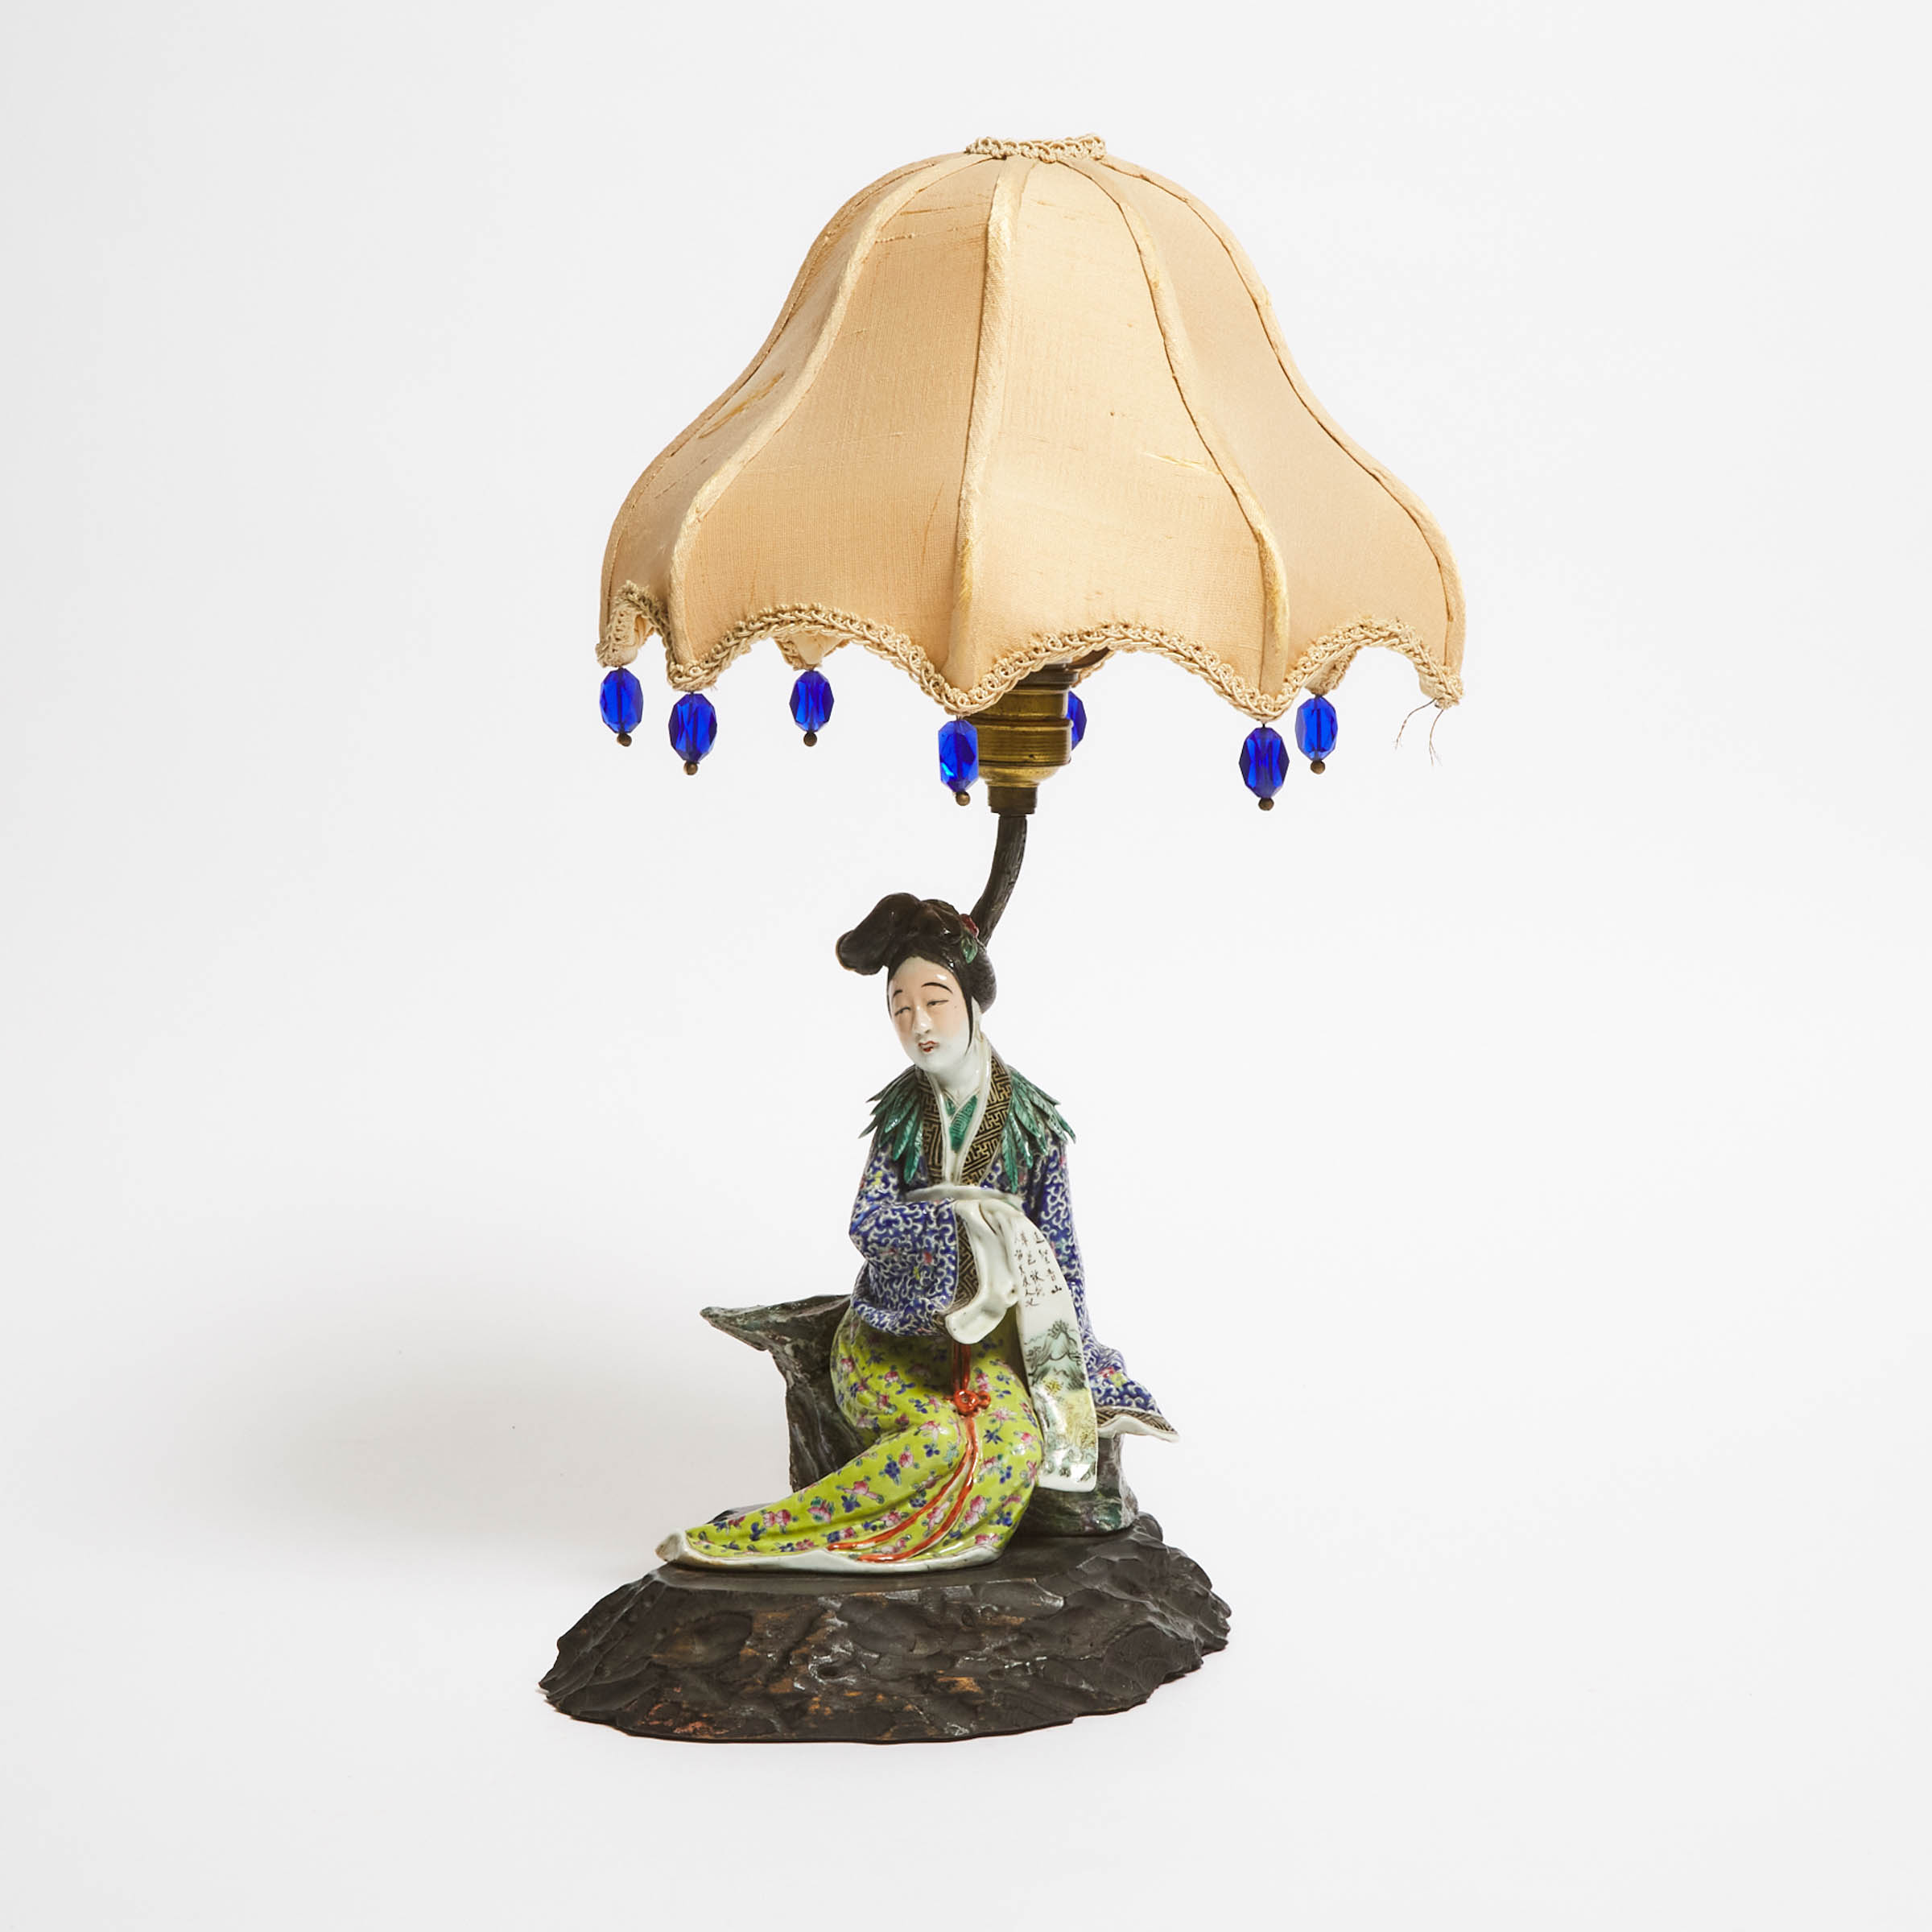 A Famille Rose Porcelain Figure of a Lady Mounted as a Lamp, Republican Period (1912-1949)